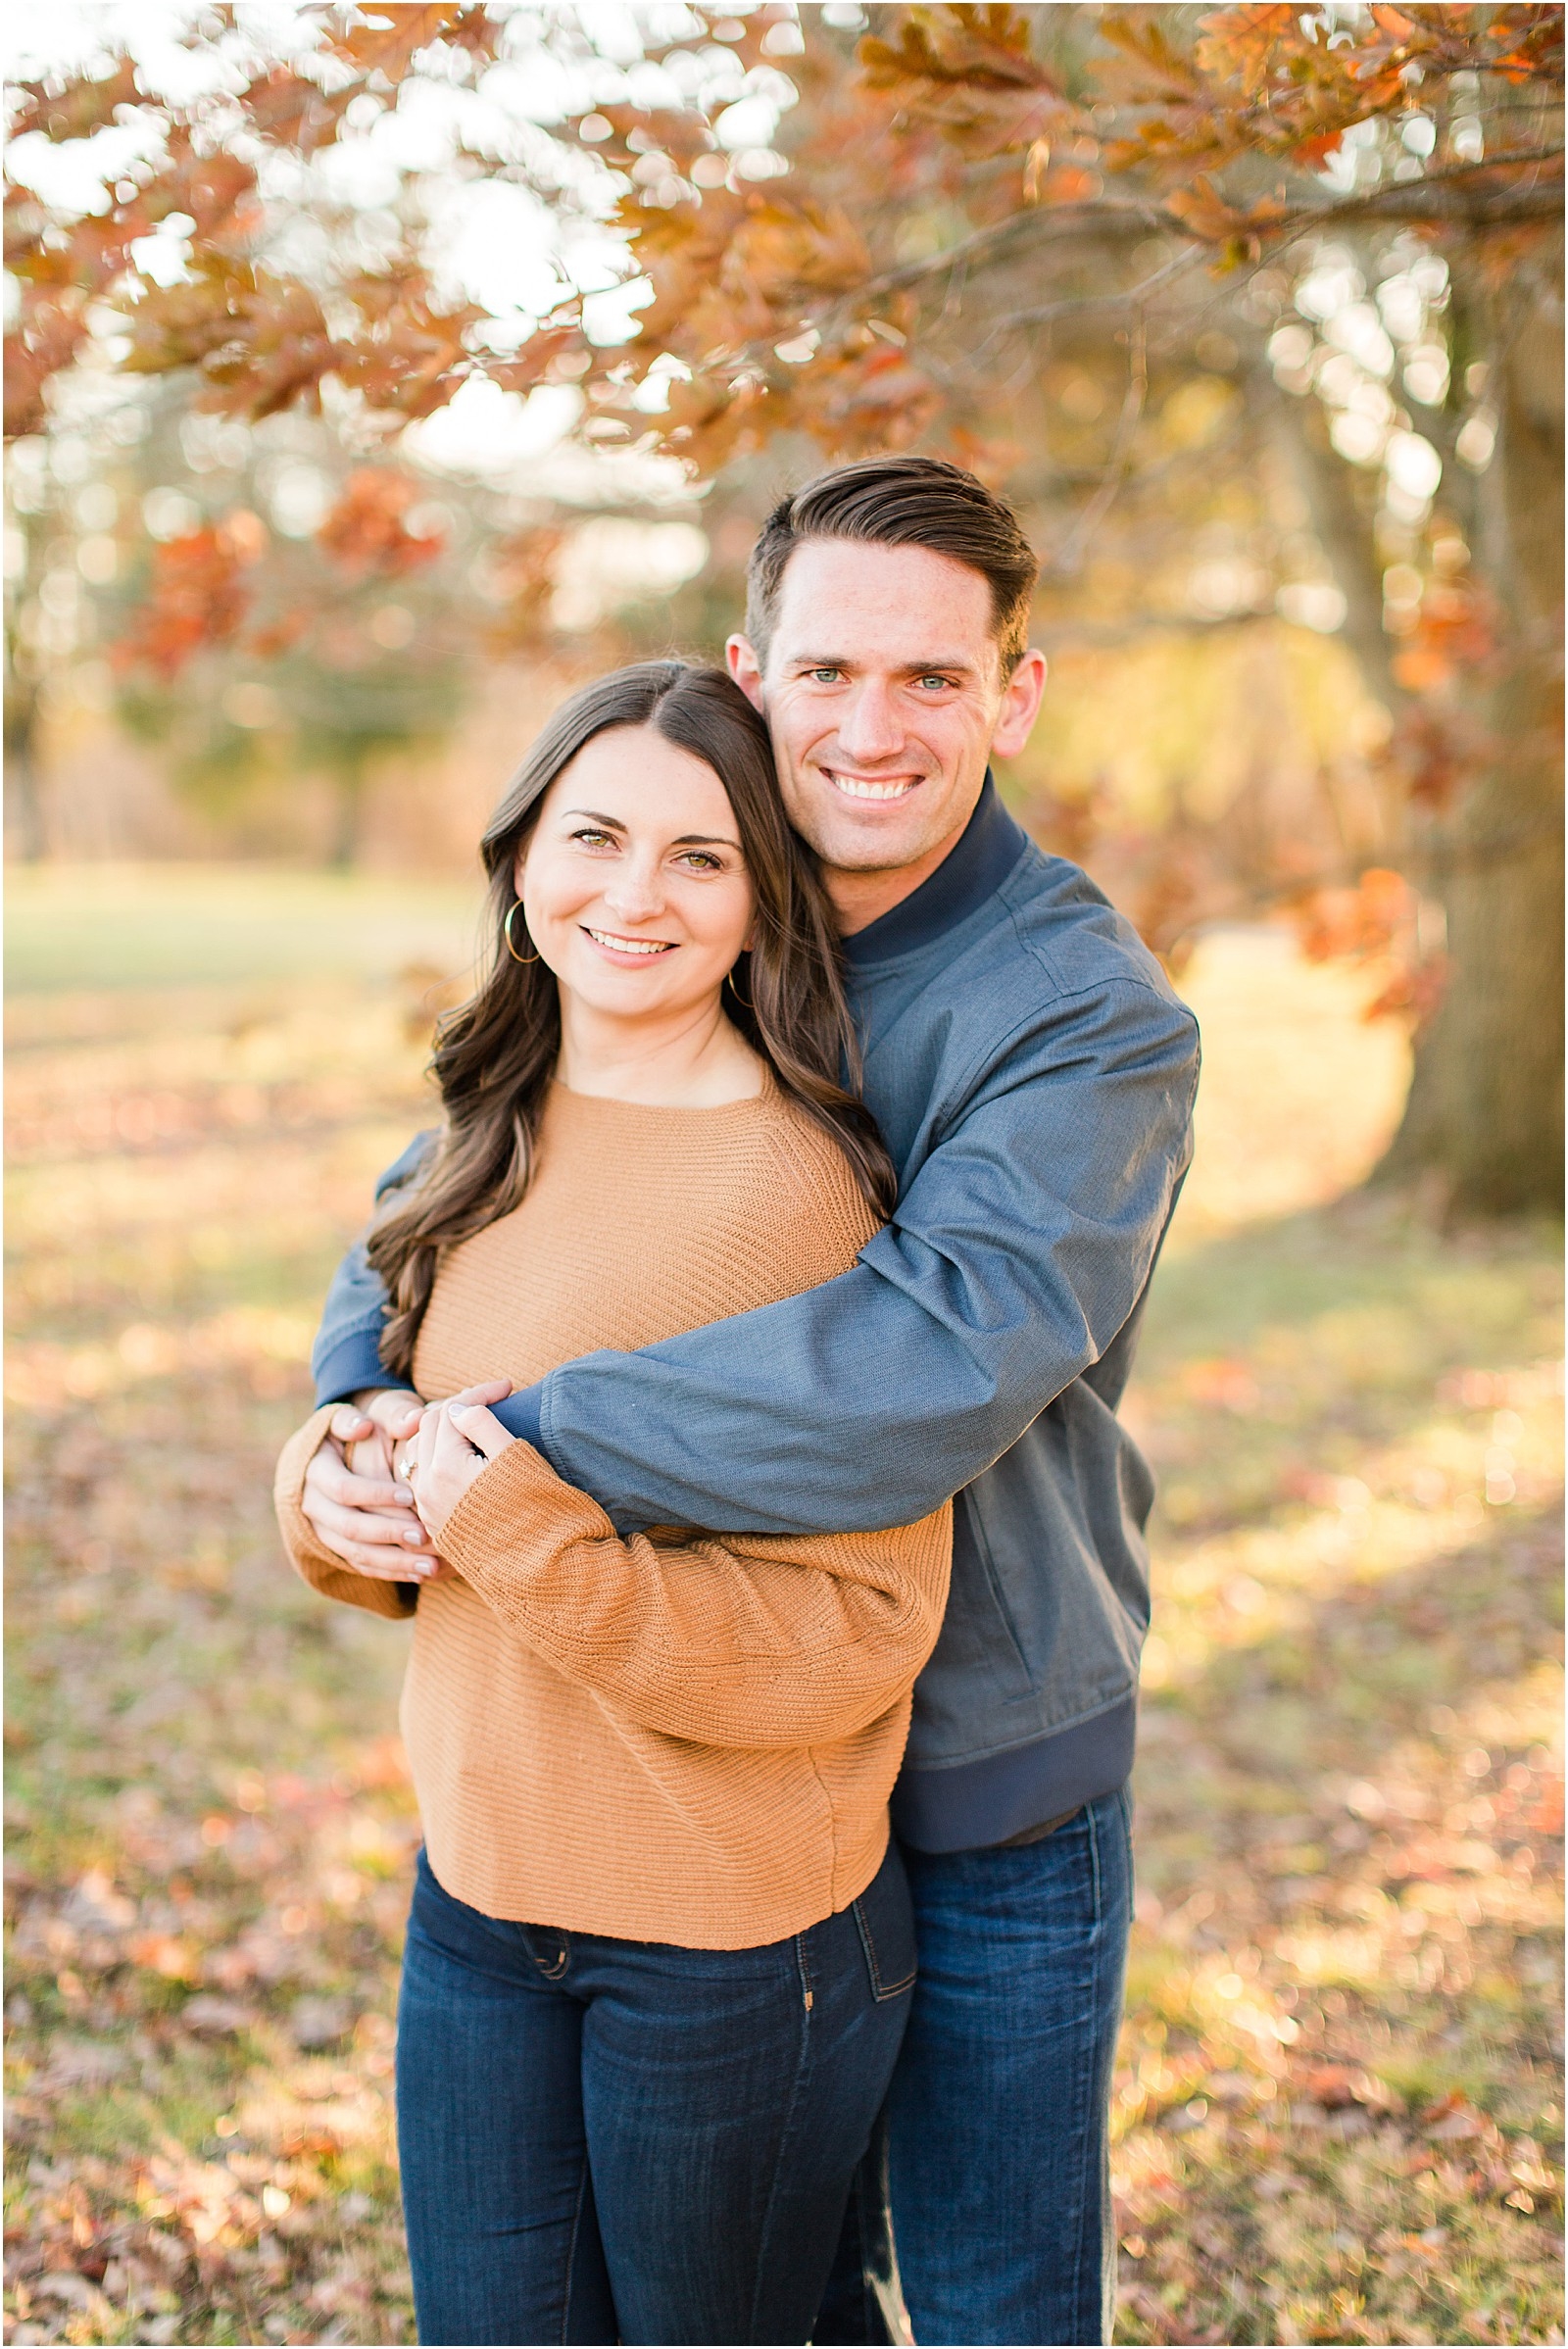 Kaley and Devon's fall Evansville Indiana engagement session. | #fallengagementsession #evansvilleindiana #evansvilleindianawedding | 0026.jpg